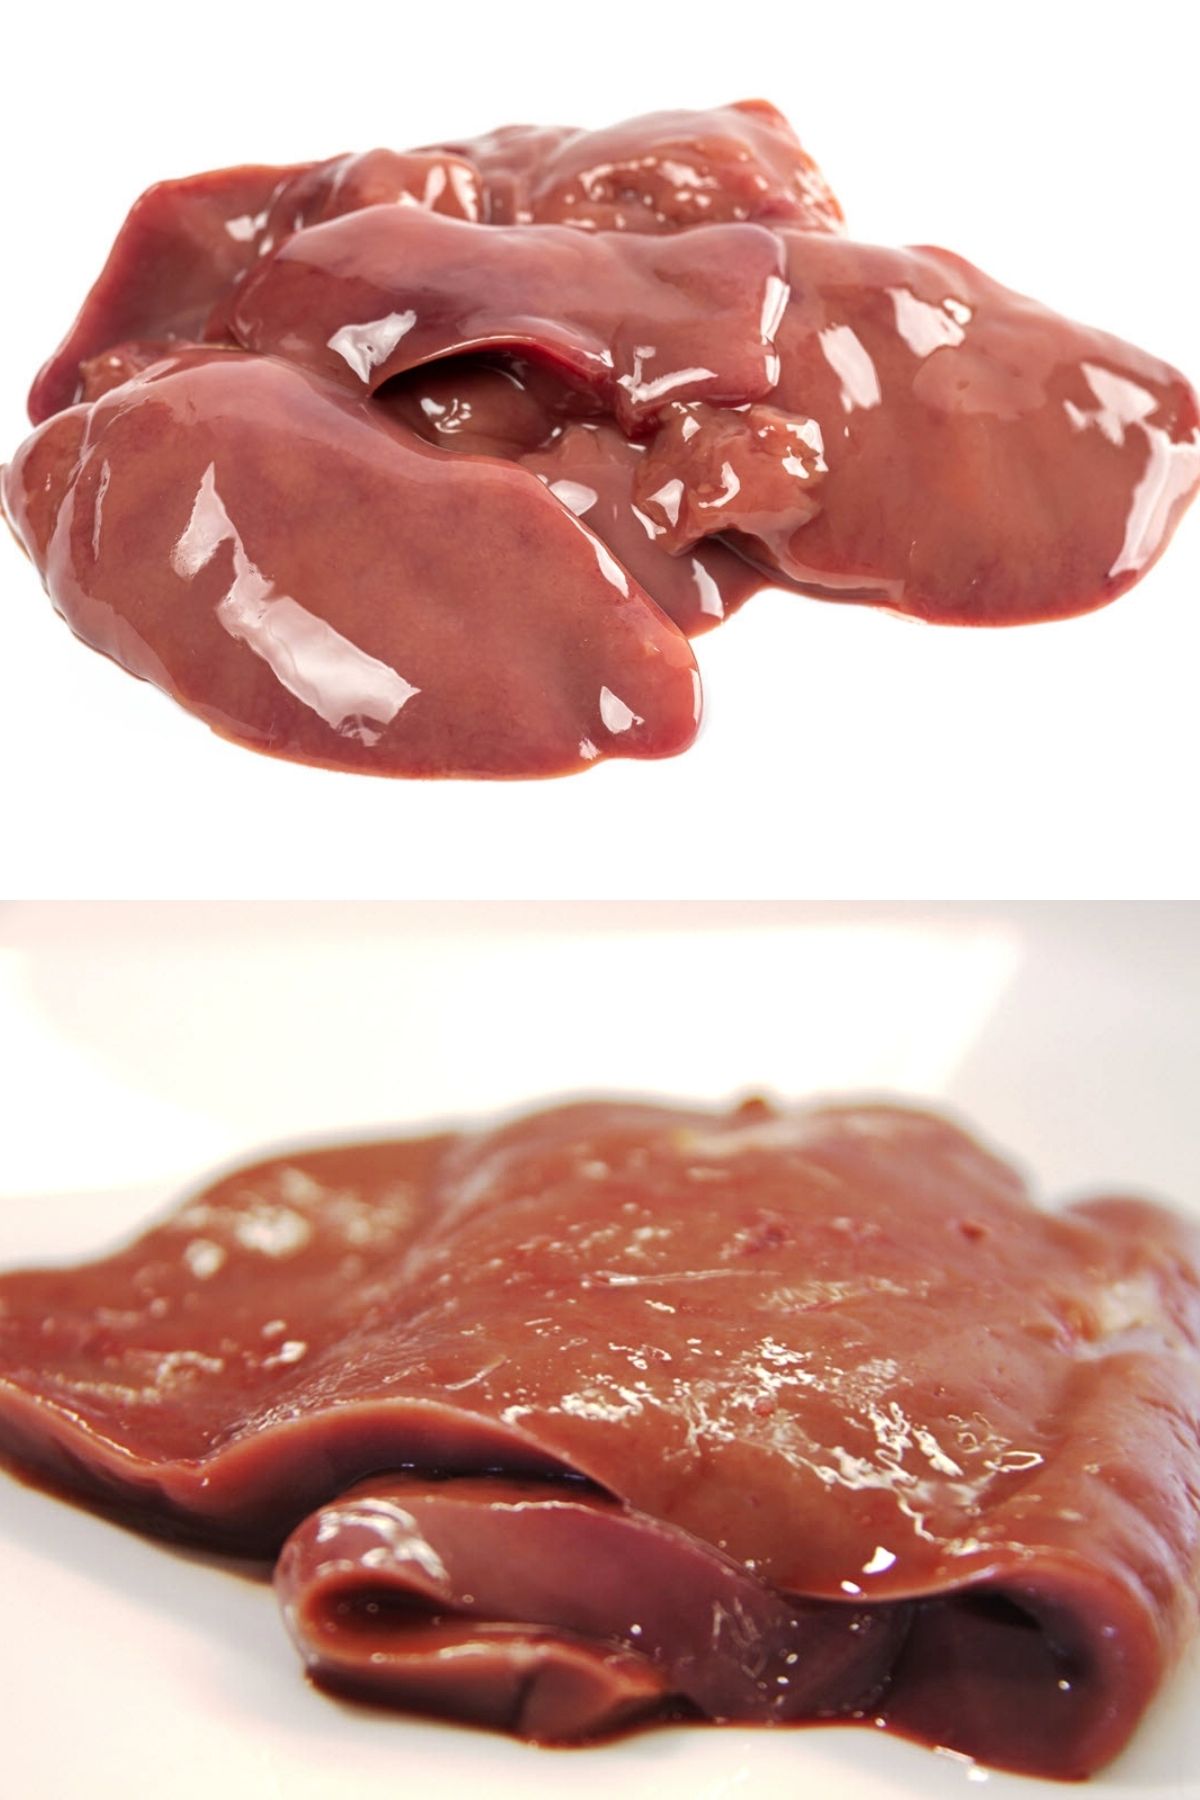 Images of raw beef and chicken liver on white background.